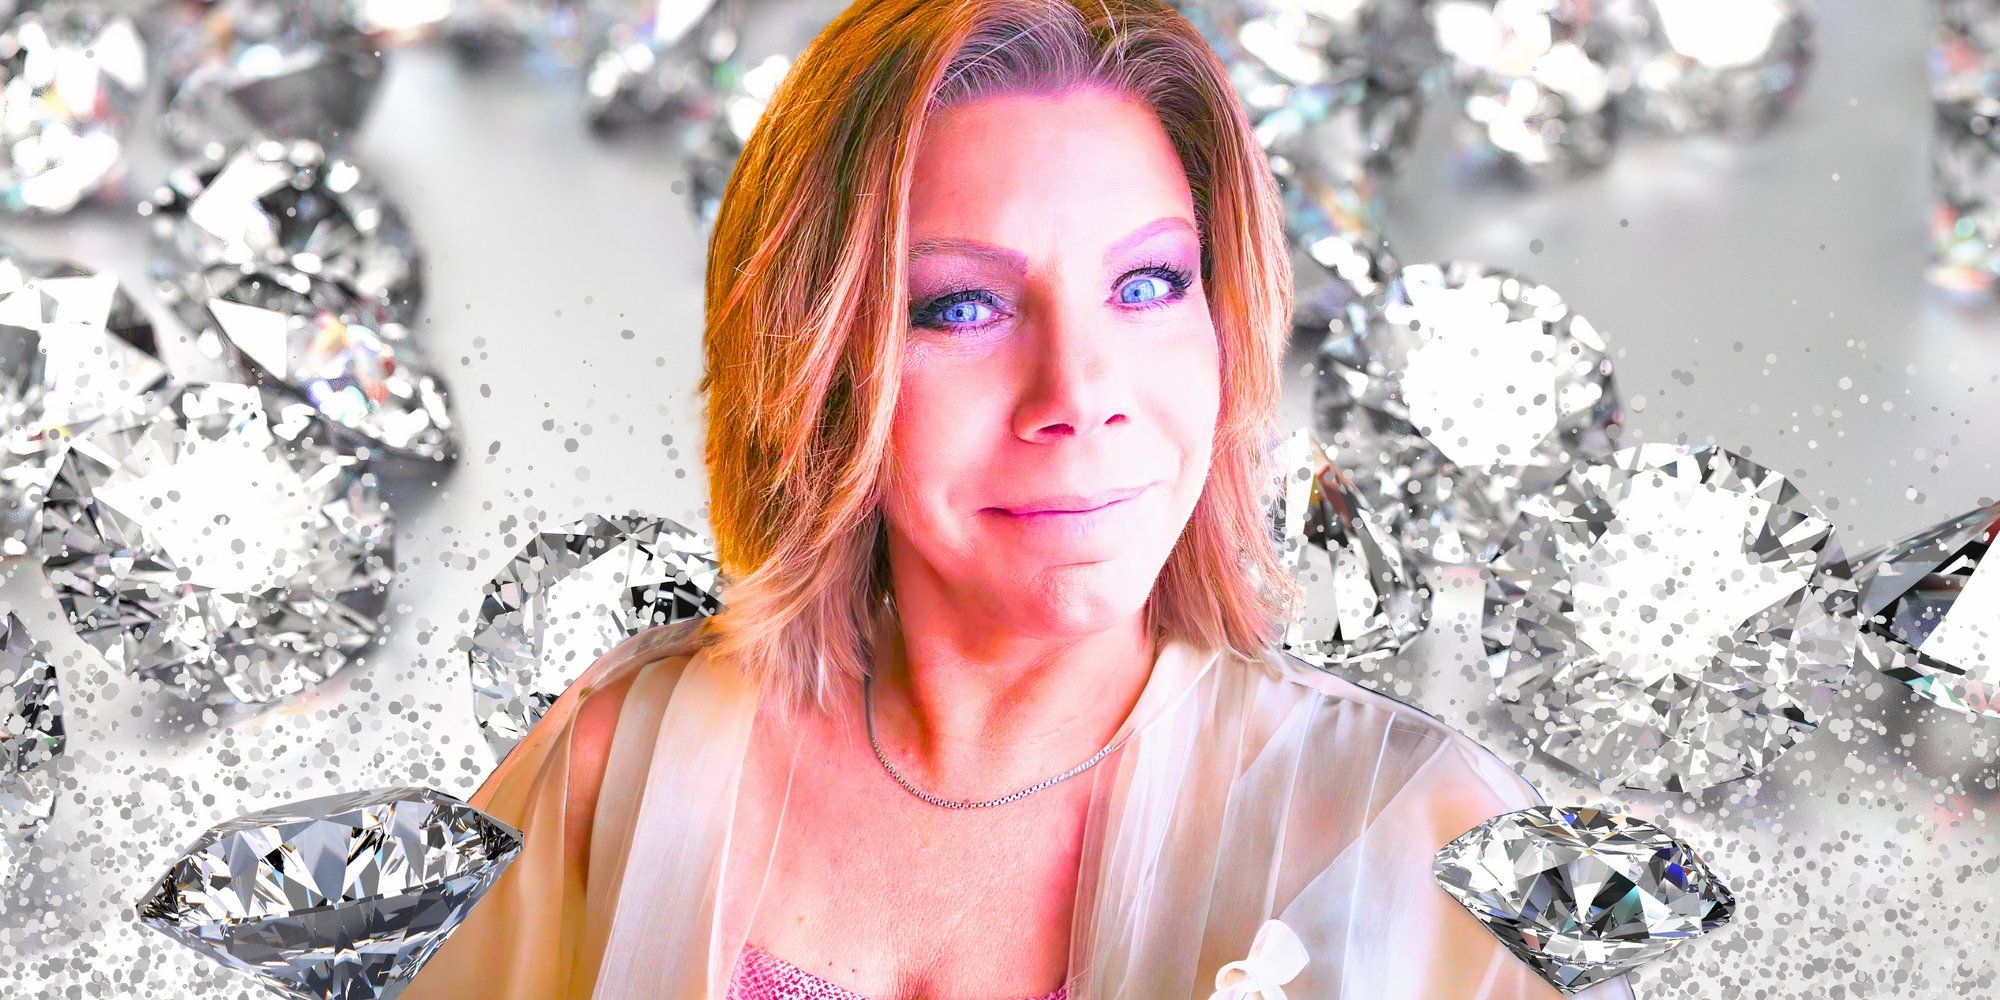 Sister Wives star meri brown in a  montage in white outfit with diamonds in background